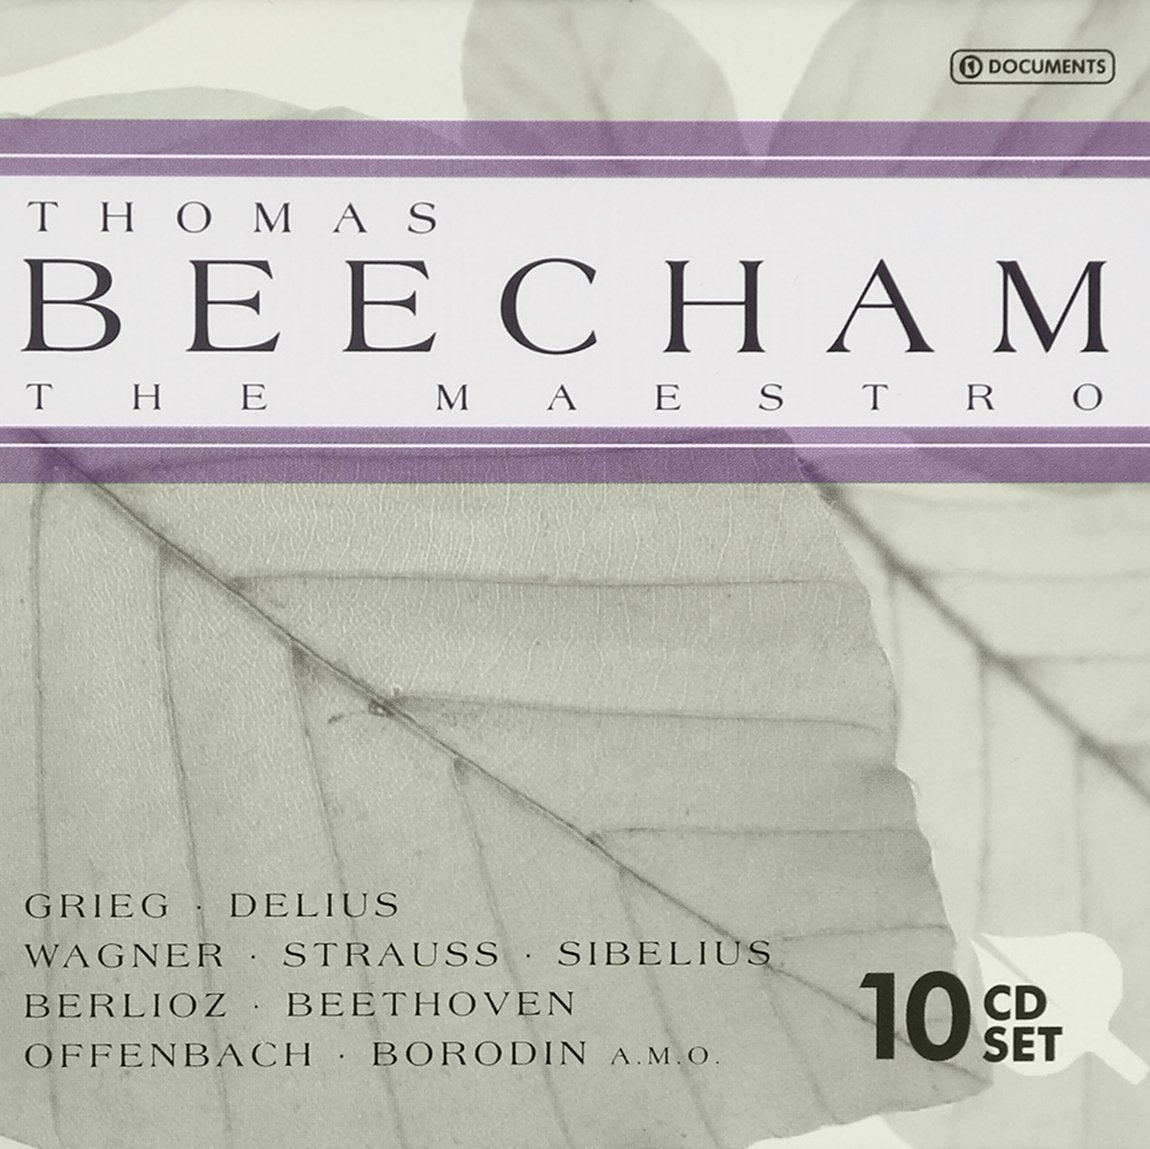 SIR THOMAS BEECHAM: THE MAESTRO - Grieg, Delius, Mozart, Haydn, Sibelius, Chabrier and More  (10 CDS)